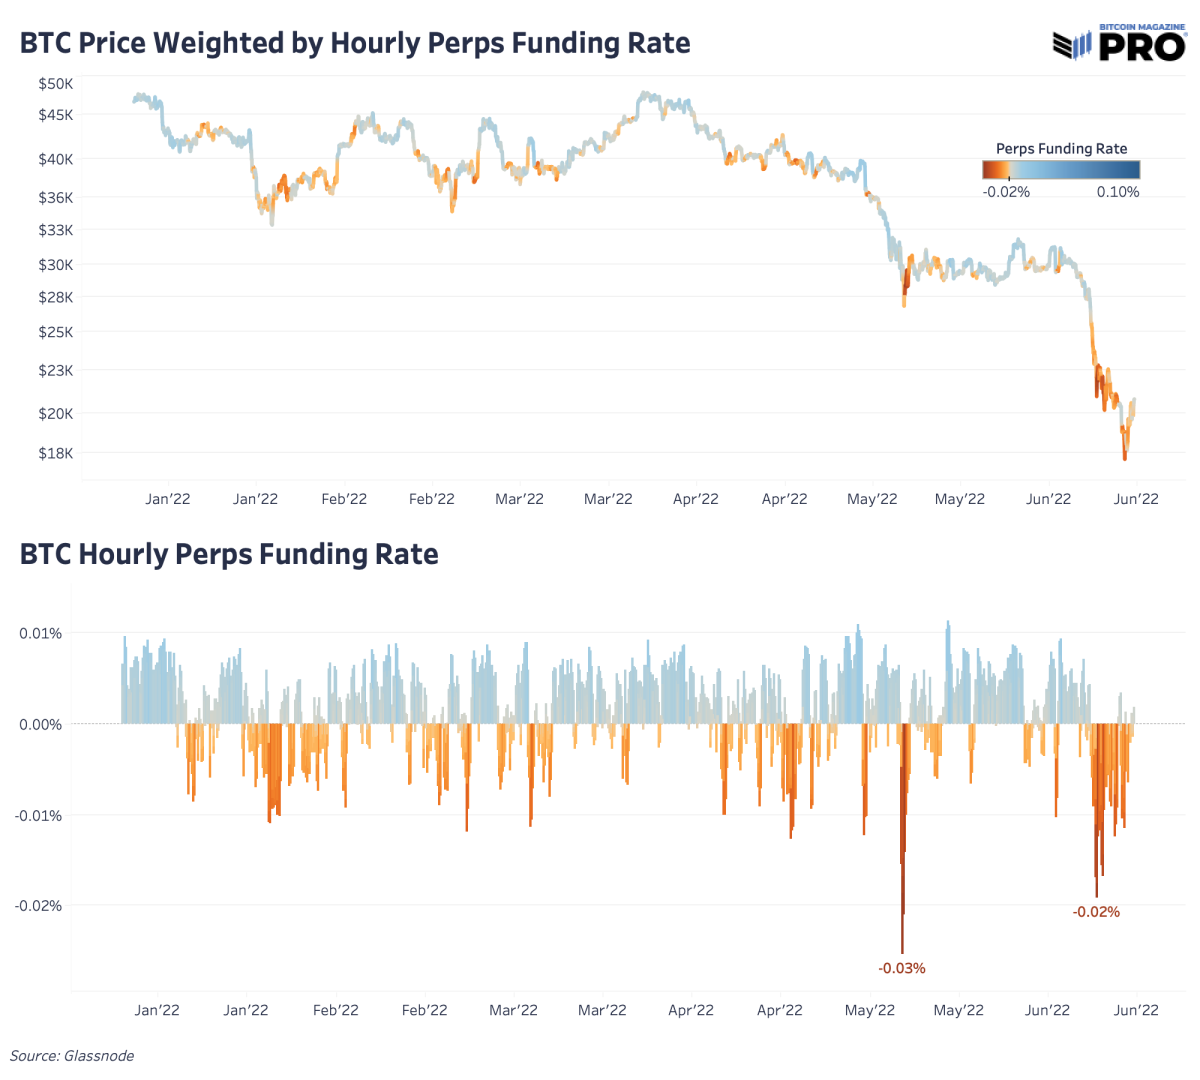 Bitcoin price weighted by the hourly perps funding rate and the hourly funding rate